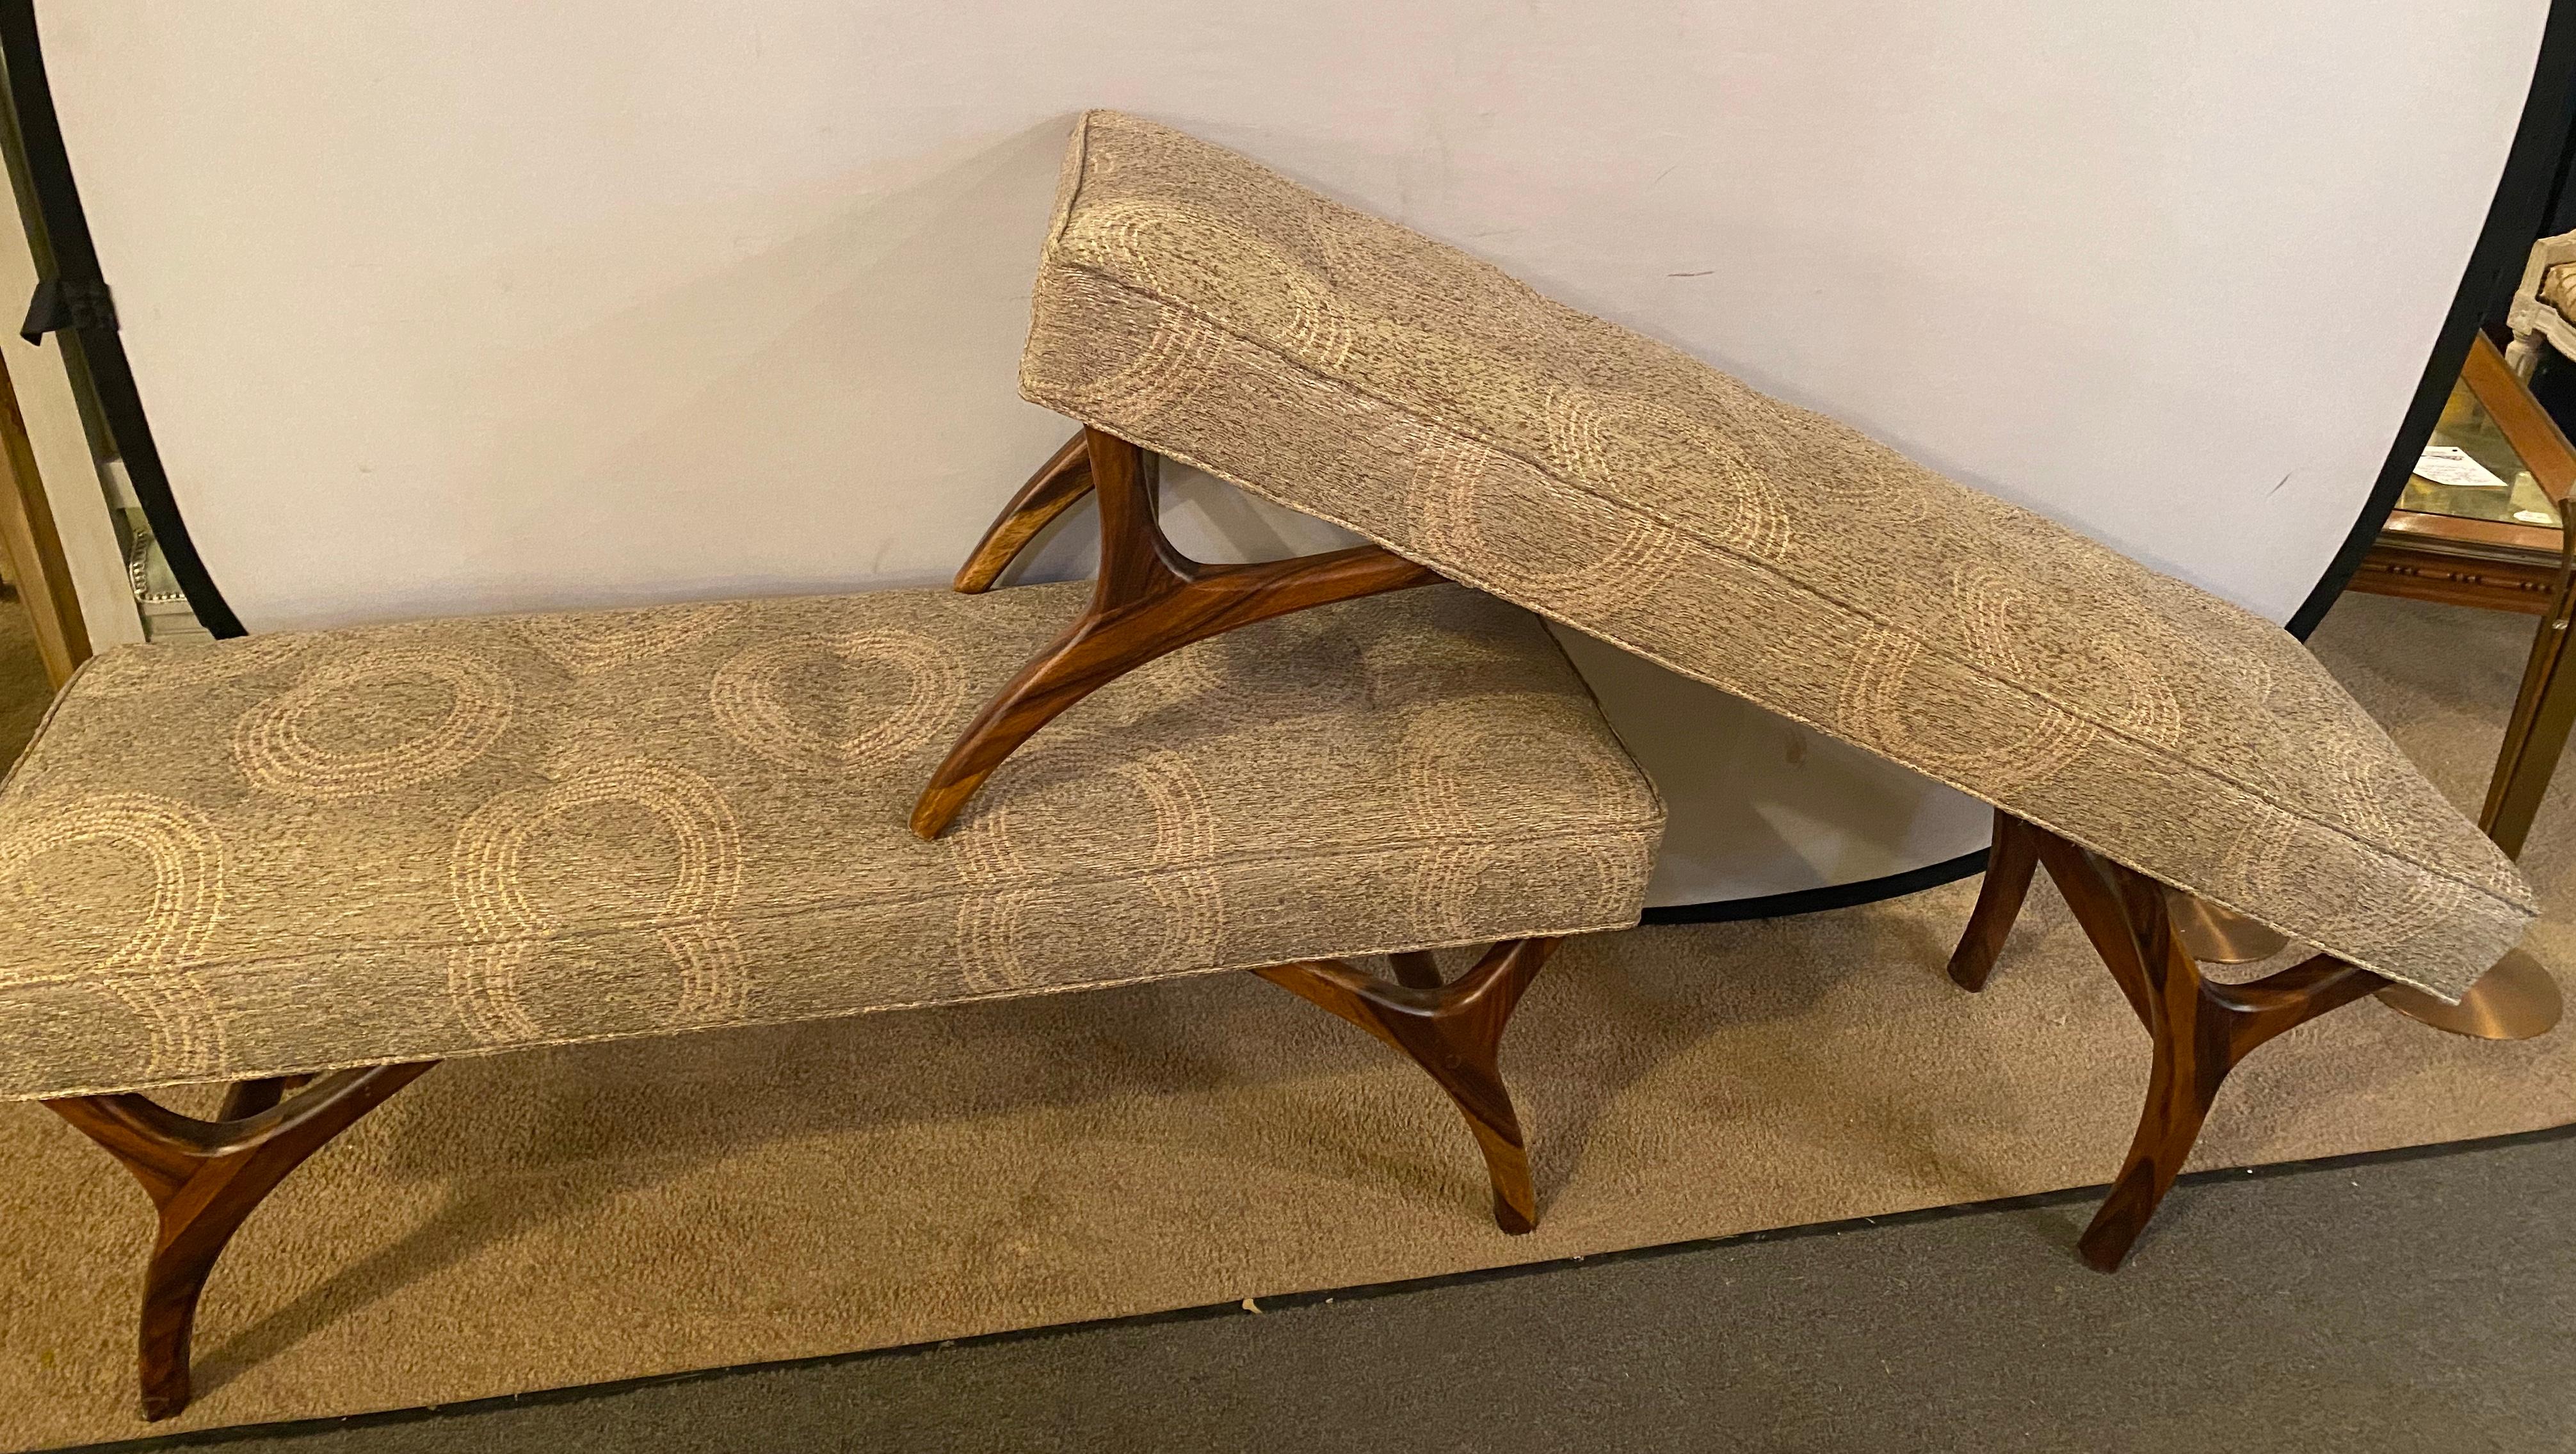 Pair of Mid-Century Modern window benches or stools in a new upholstery with new welts and springs. The fine rosewood like carved legs supporting a comfortable and recently upholstered seat.